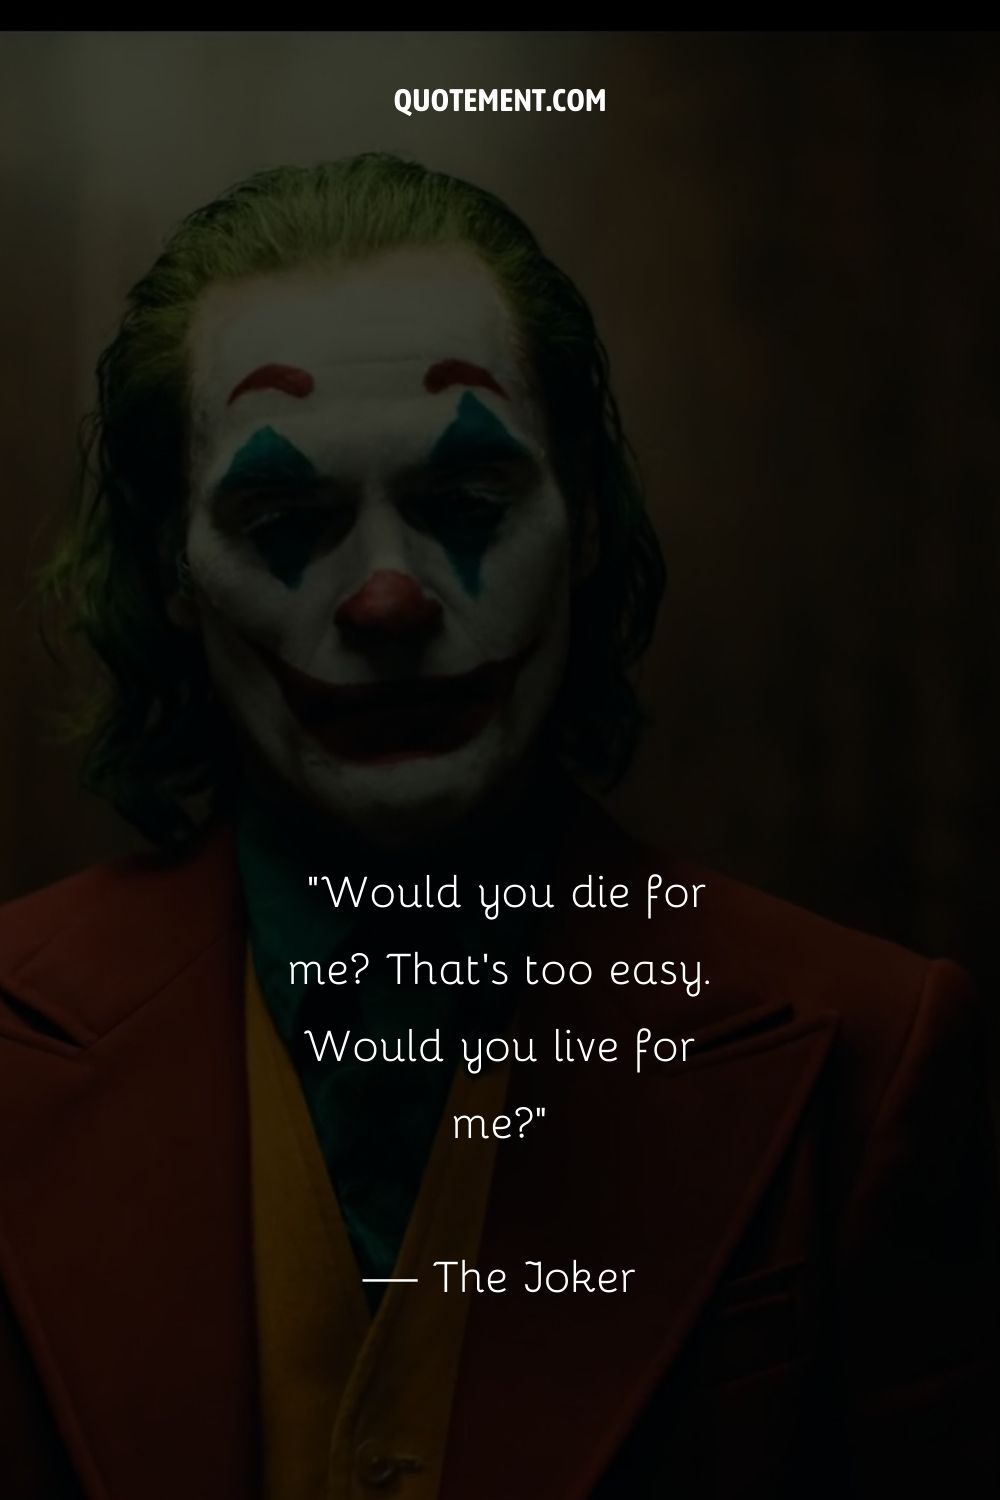 Famous Joker quote from the Suicide Squad movie.
